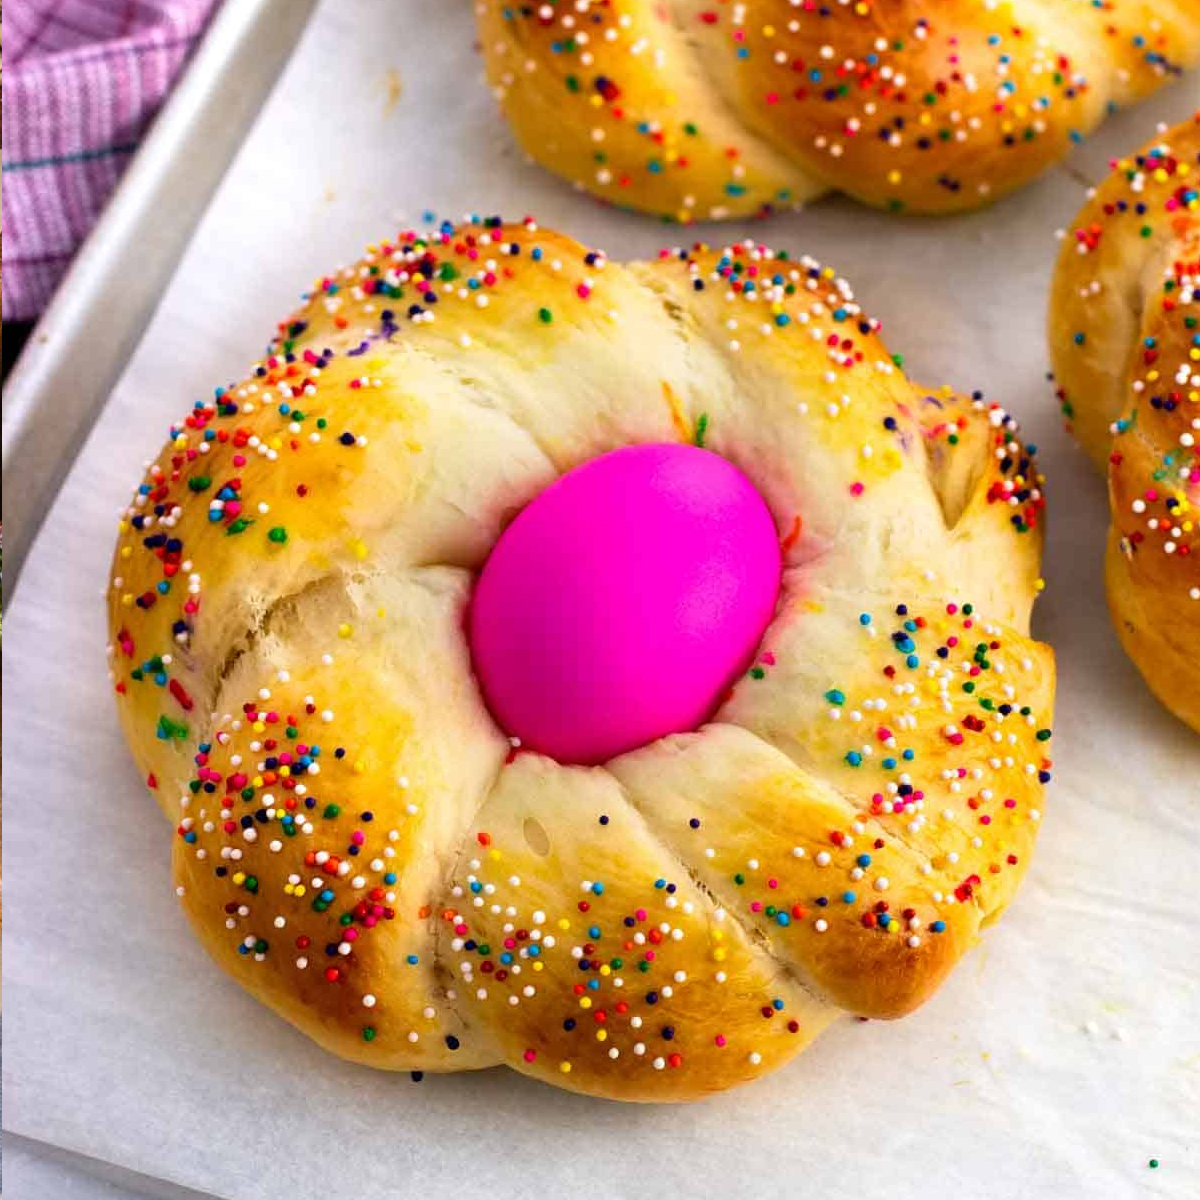 It's time to get inspired for Easter with these 30+ Easter Recipes. No matter what your plans are for the day, there's something for you. It's all here– from fluffy pancakes and homemade biscuits to herb crusted salmon to brown butter pecan cookies.